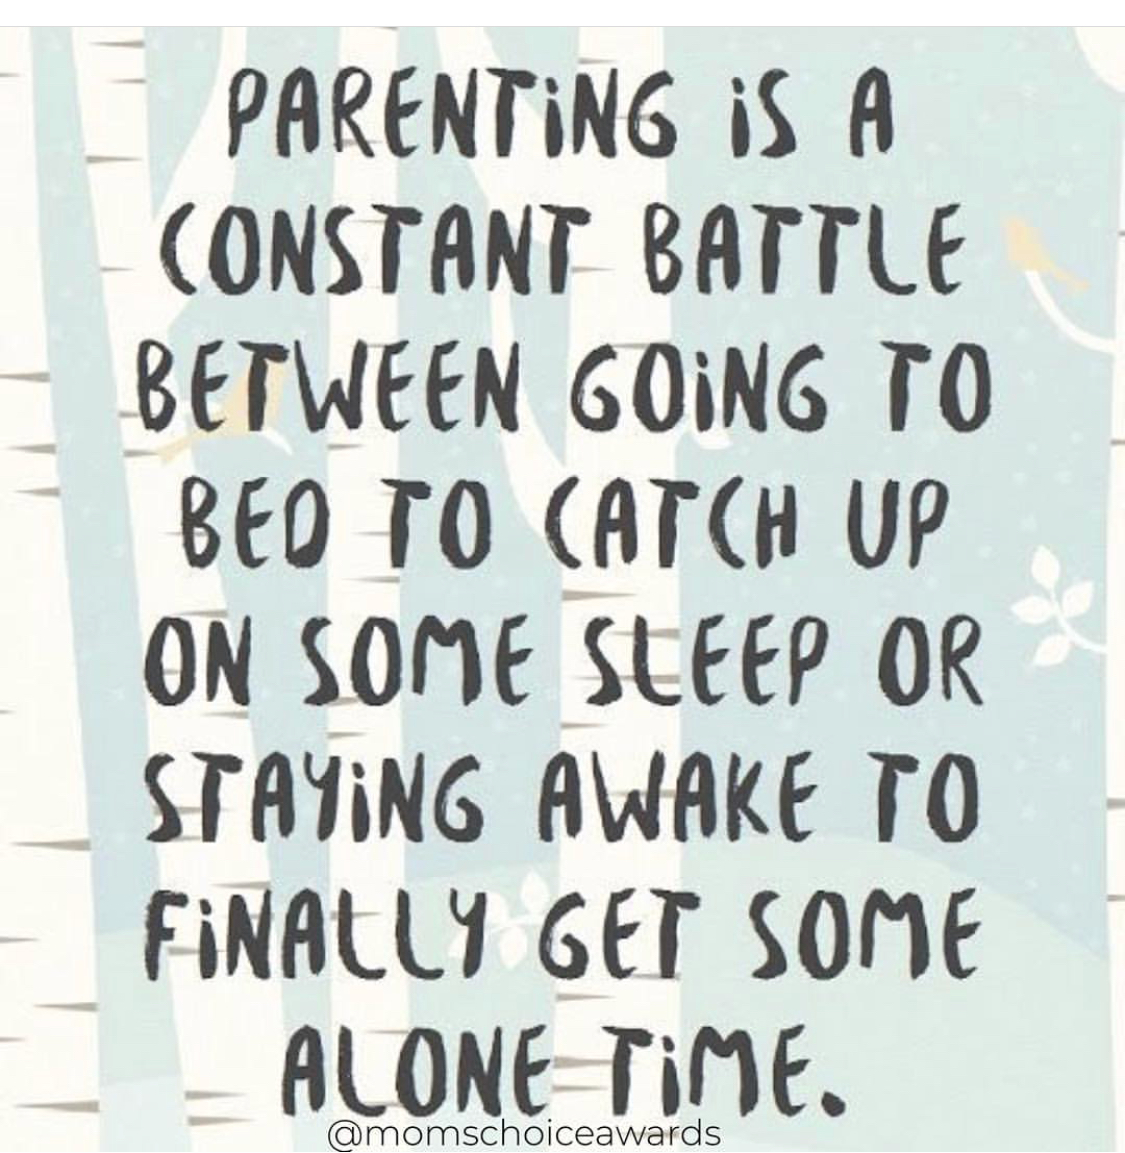 Parenting Is A Constant Battle Between Going To Bed To Catch Up On Some Sleep Or Staying Awake To Finally Get Some Alone Time. #thejuggleisreal #parenting